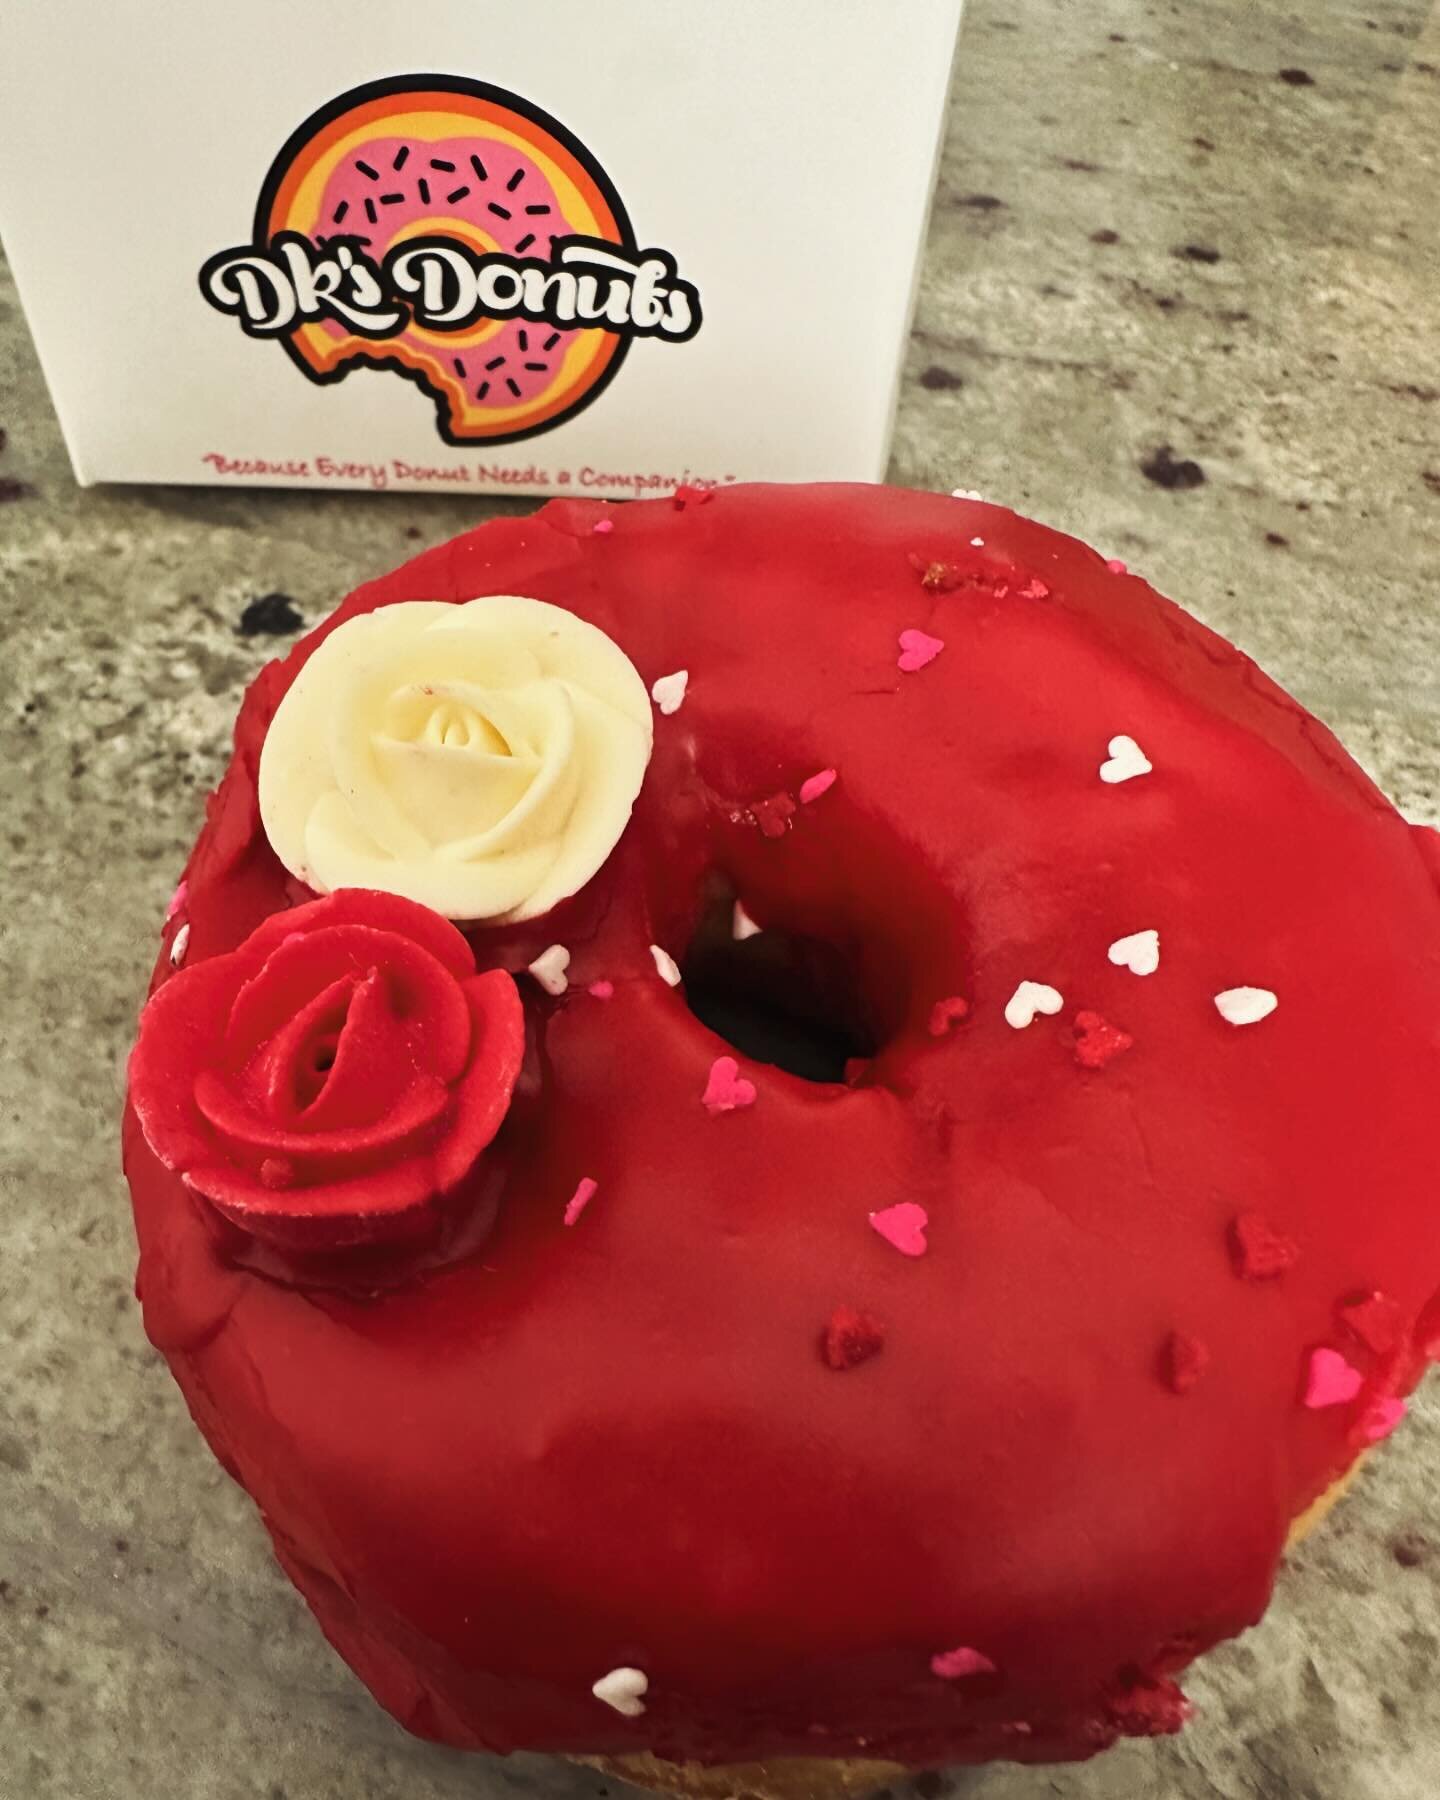 Donuts are red&hellip; violets are.. who cares! 
He gets me! Happy Valentine&rsquo;s Day everyone! 🩷💓💞💝💘💖💕💗🍩🍩🍩🍩🍩
@dksdonuts 

#valentinesdaygift #valentinesbreakfast #valentinesurprise #valentinebreakfast #valentinedonuts #donuts🍩 #donu